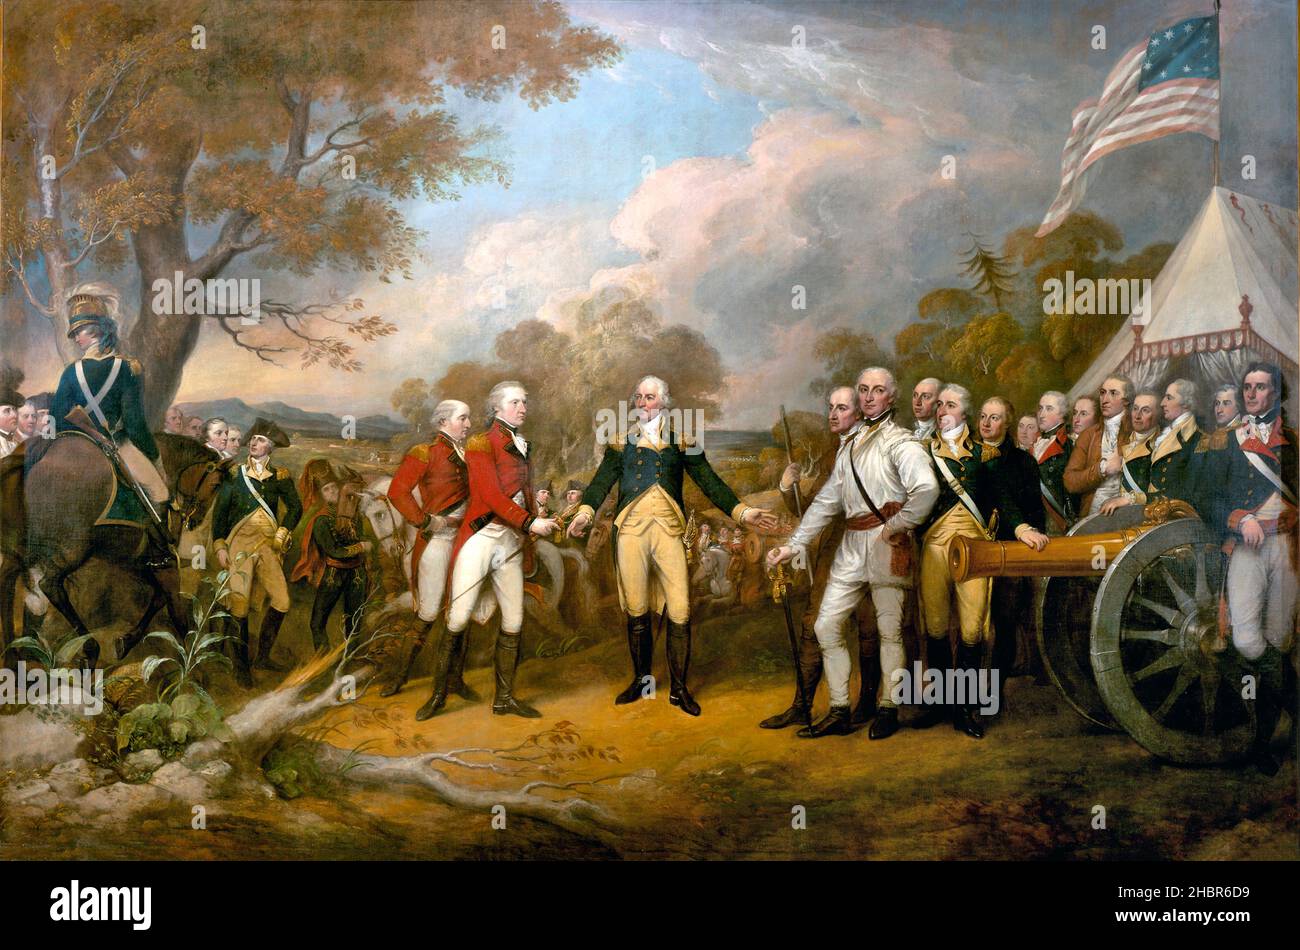 Trumbull (John Trumbull (June 6, 1756 – November 10, 1843)) Series II – Surrender of Burgoyne [The Surrender of General Burgoyne is an oil painting by John Trumbull. The painting was completed in 1821, and hangs in the rotunda of the United States Capitol in Washington, D. C. The painting depicts the surrender of British Lieutenant General John Burgoyne at Saratoga, New York on October 17, 1777, ten days after the Second Battle of Saratoga. Included in the depiction are many leaders of the American Continental Army and militia forces that took part in the battle as well as the Hessian commande Stock Photo